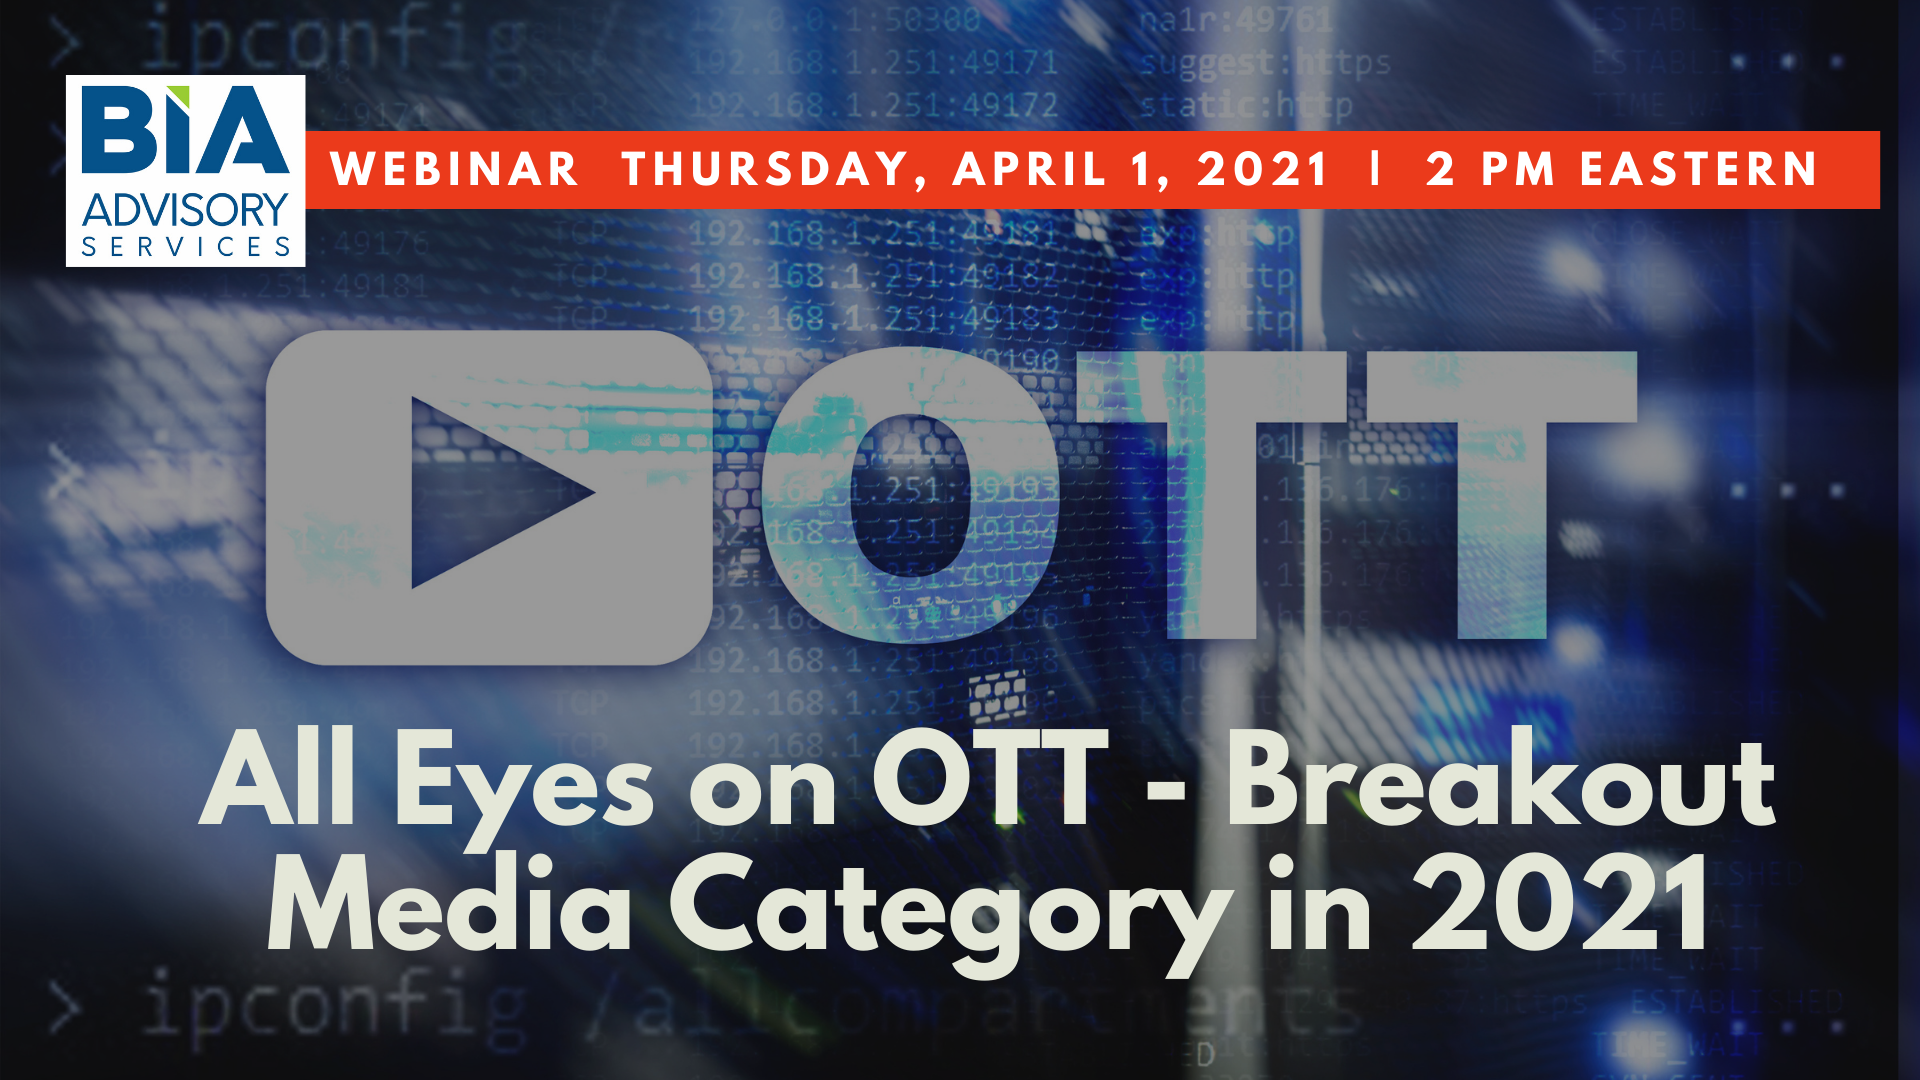 Connected TV Is Growing In Local: BIA Webinar Dives Into Outlook For 2021